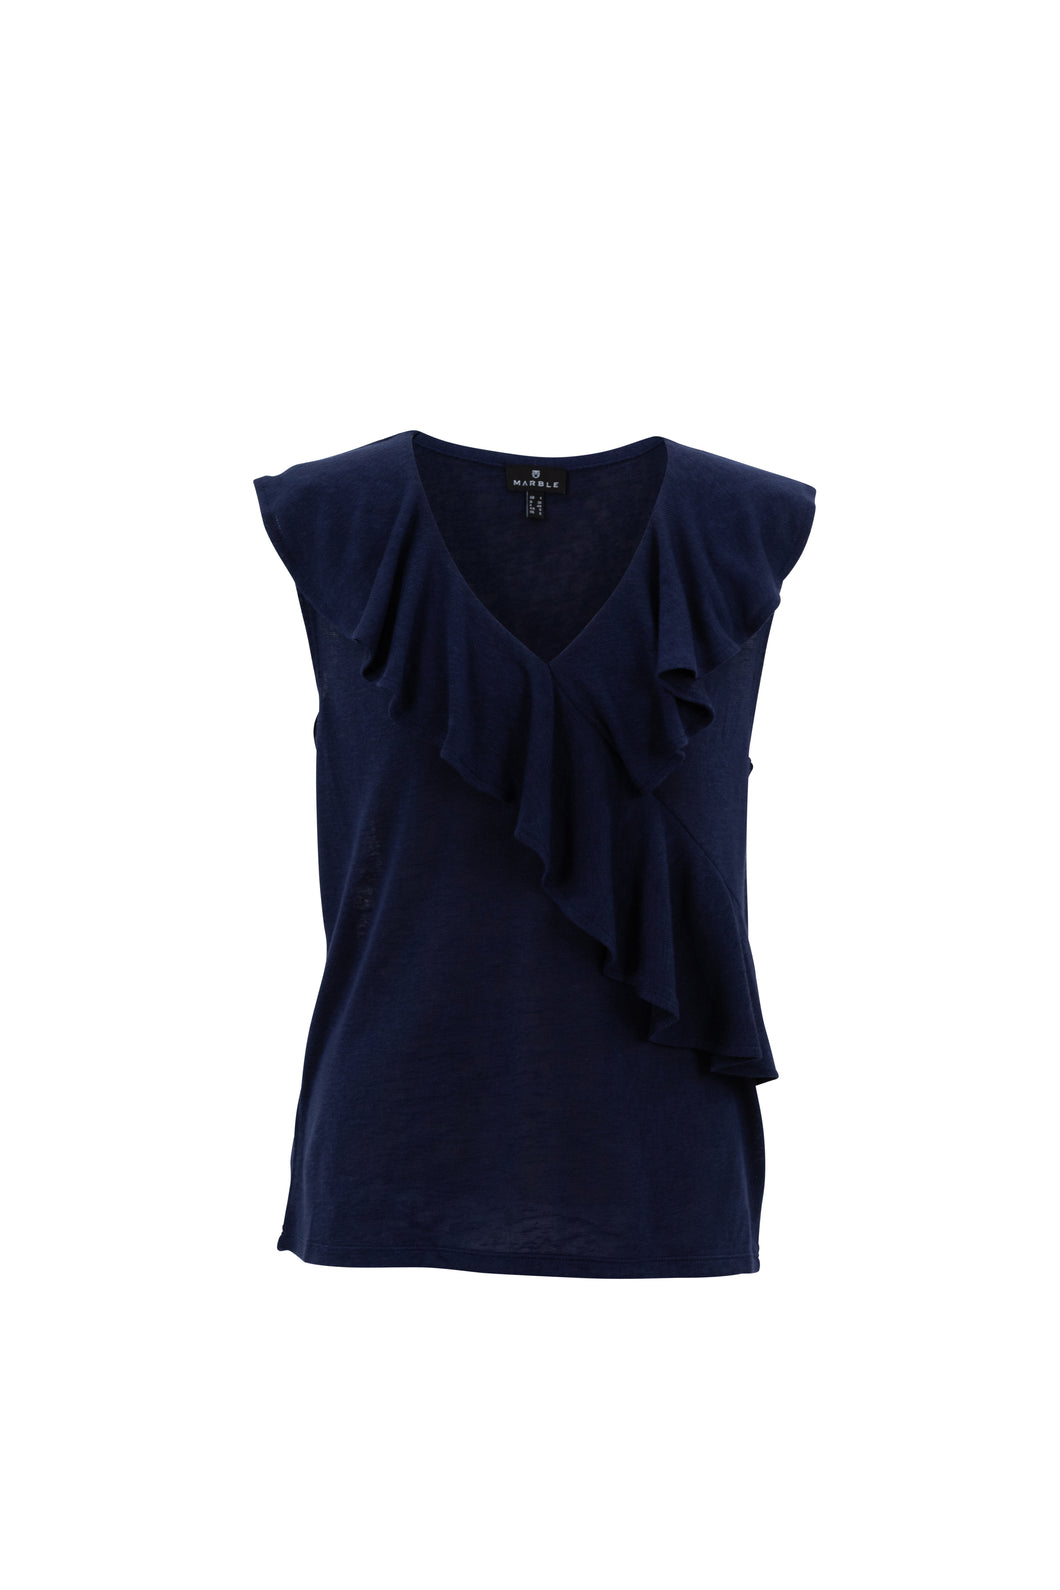 MARBLE 7376 V NECK TOP COL 103 NAVY